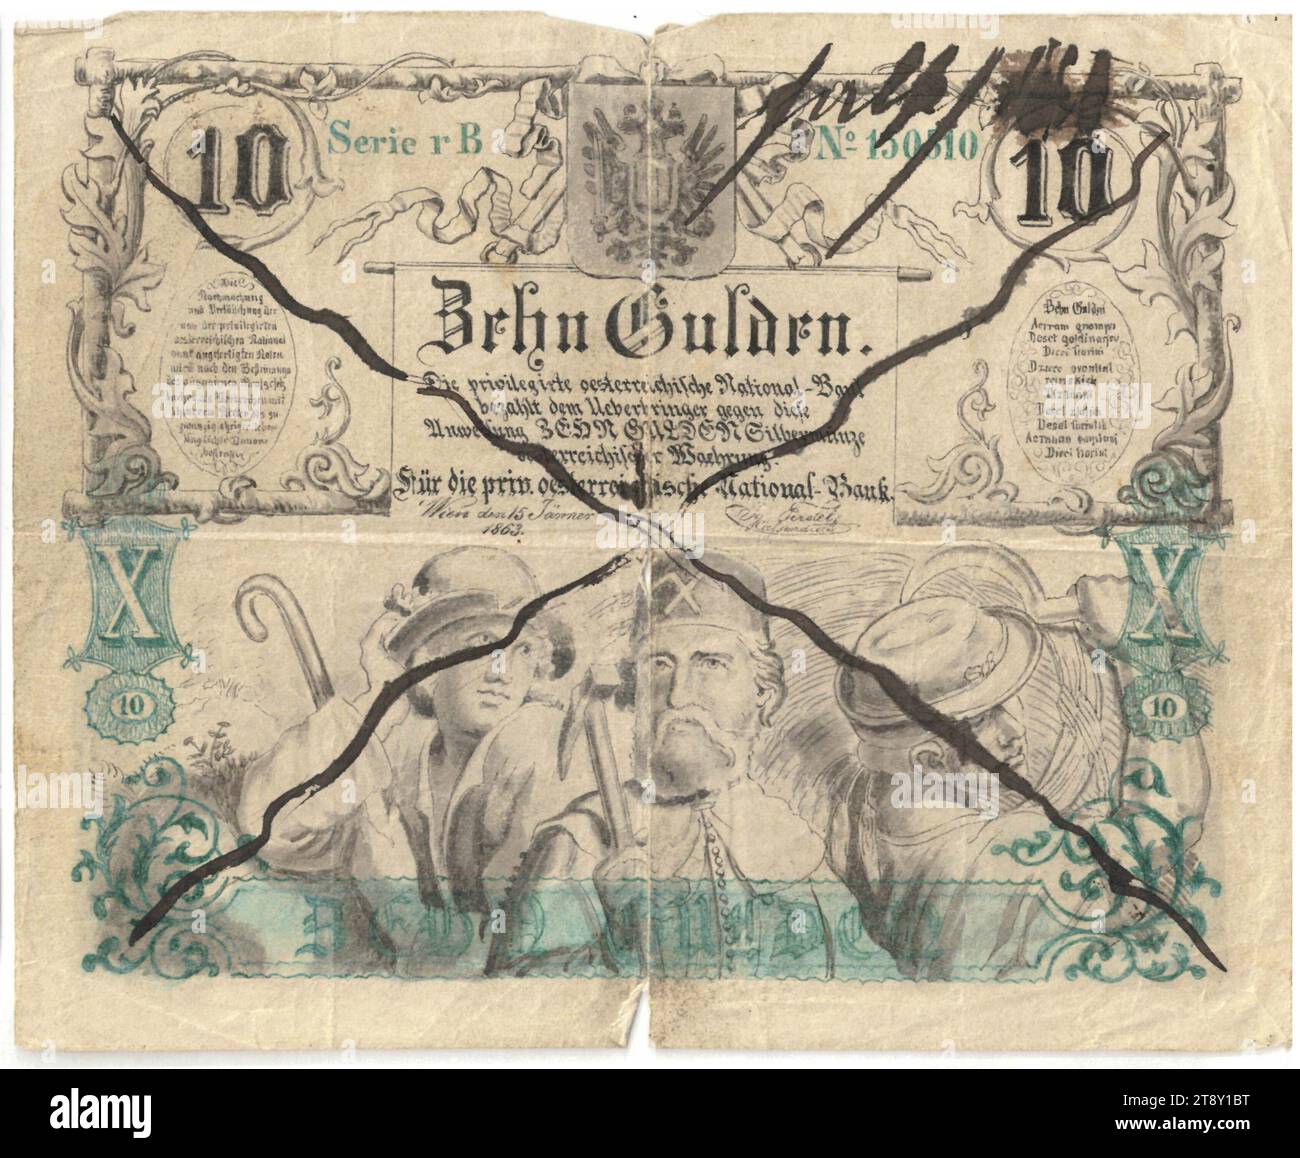 Banknote (forgery), 10 Gulden, Privilegierte Österreichische National-Bank, mint authority, Date after 15.01.1863, paper, printing, width 140 mm, height 114 mm, Mint, Vienna, Mint territory, Austria, Empire (1804-1867), Finance, counterfeit, forgery, working class, laborers, farmers, coat of arms (as symbol of the state, etc.), bank-note, money, The Vienna Collection Stock Photo